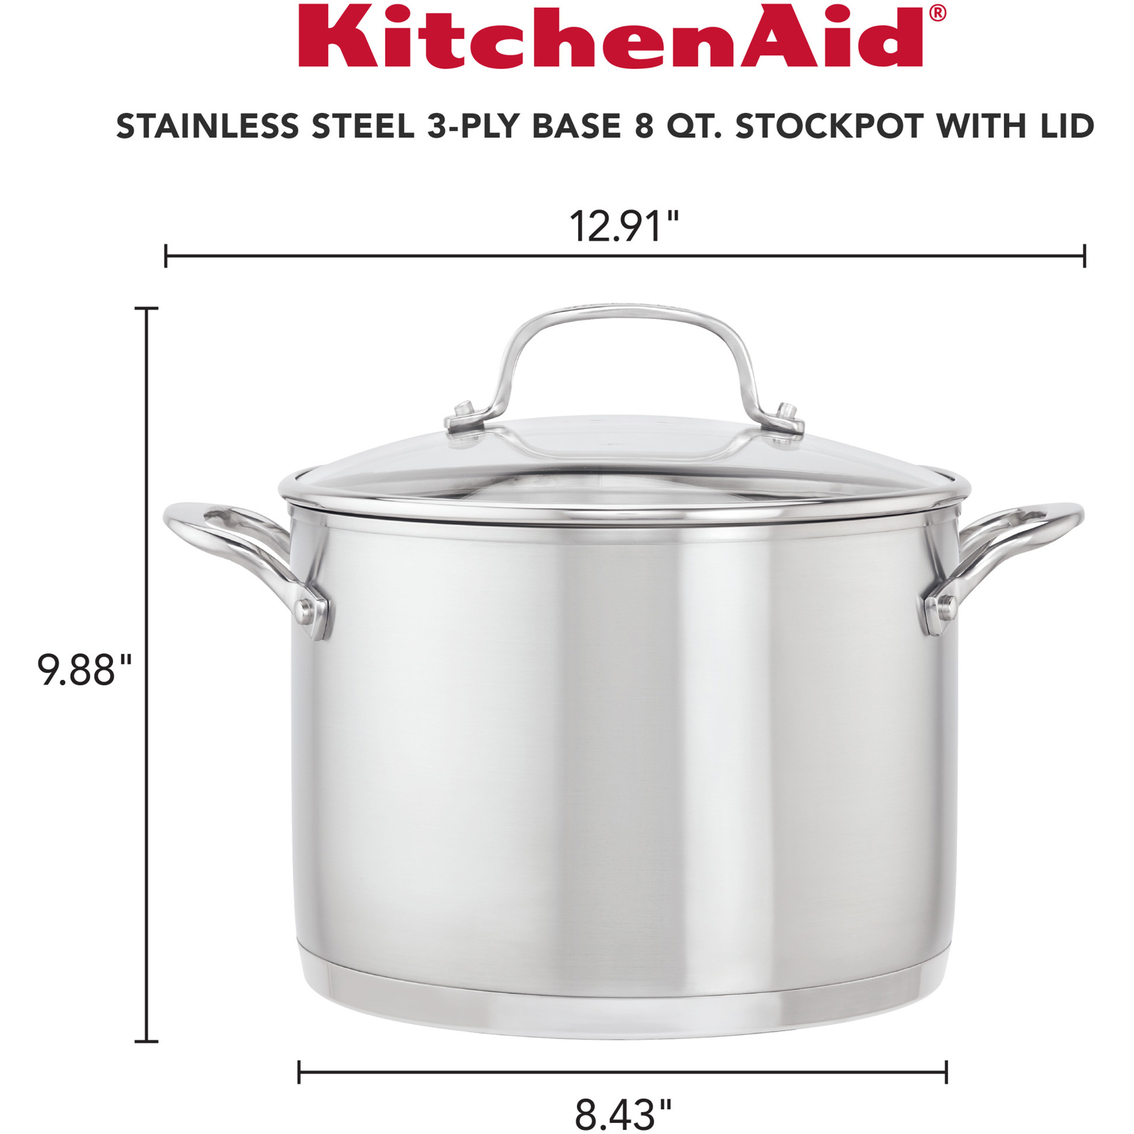 KitchenAid 8 qt. 3 Ply Base Stainless Steel Stockpot with Measuring Marks and Lid - Image 10 of 10